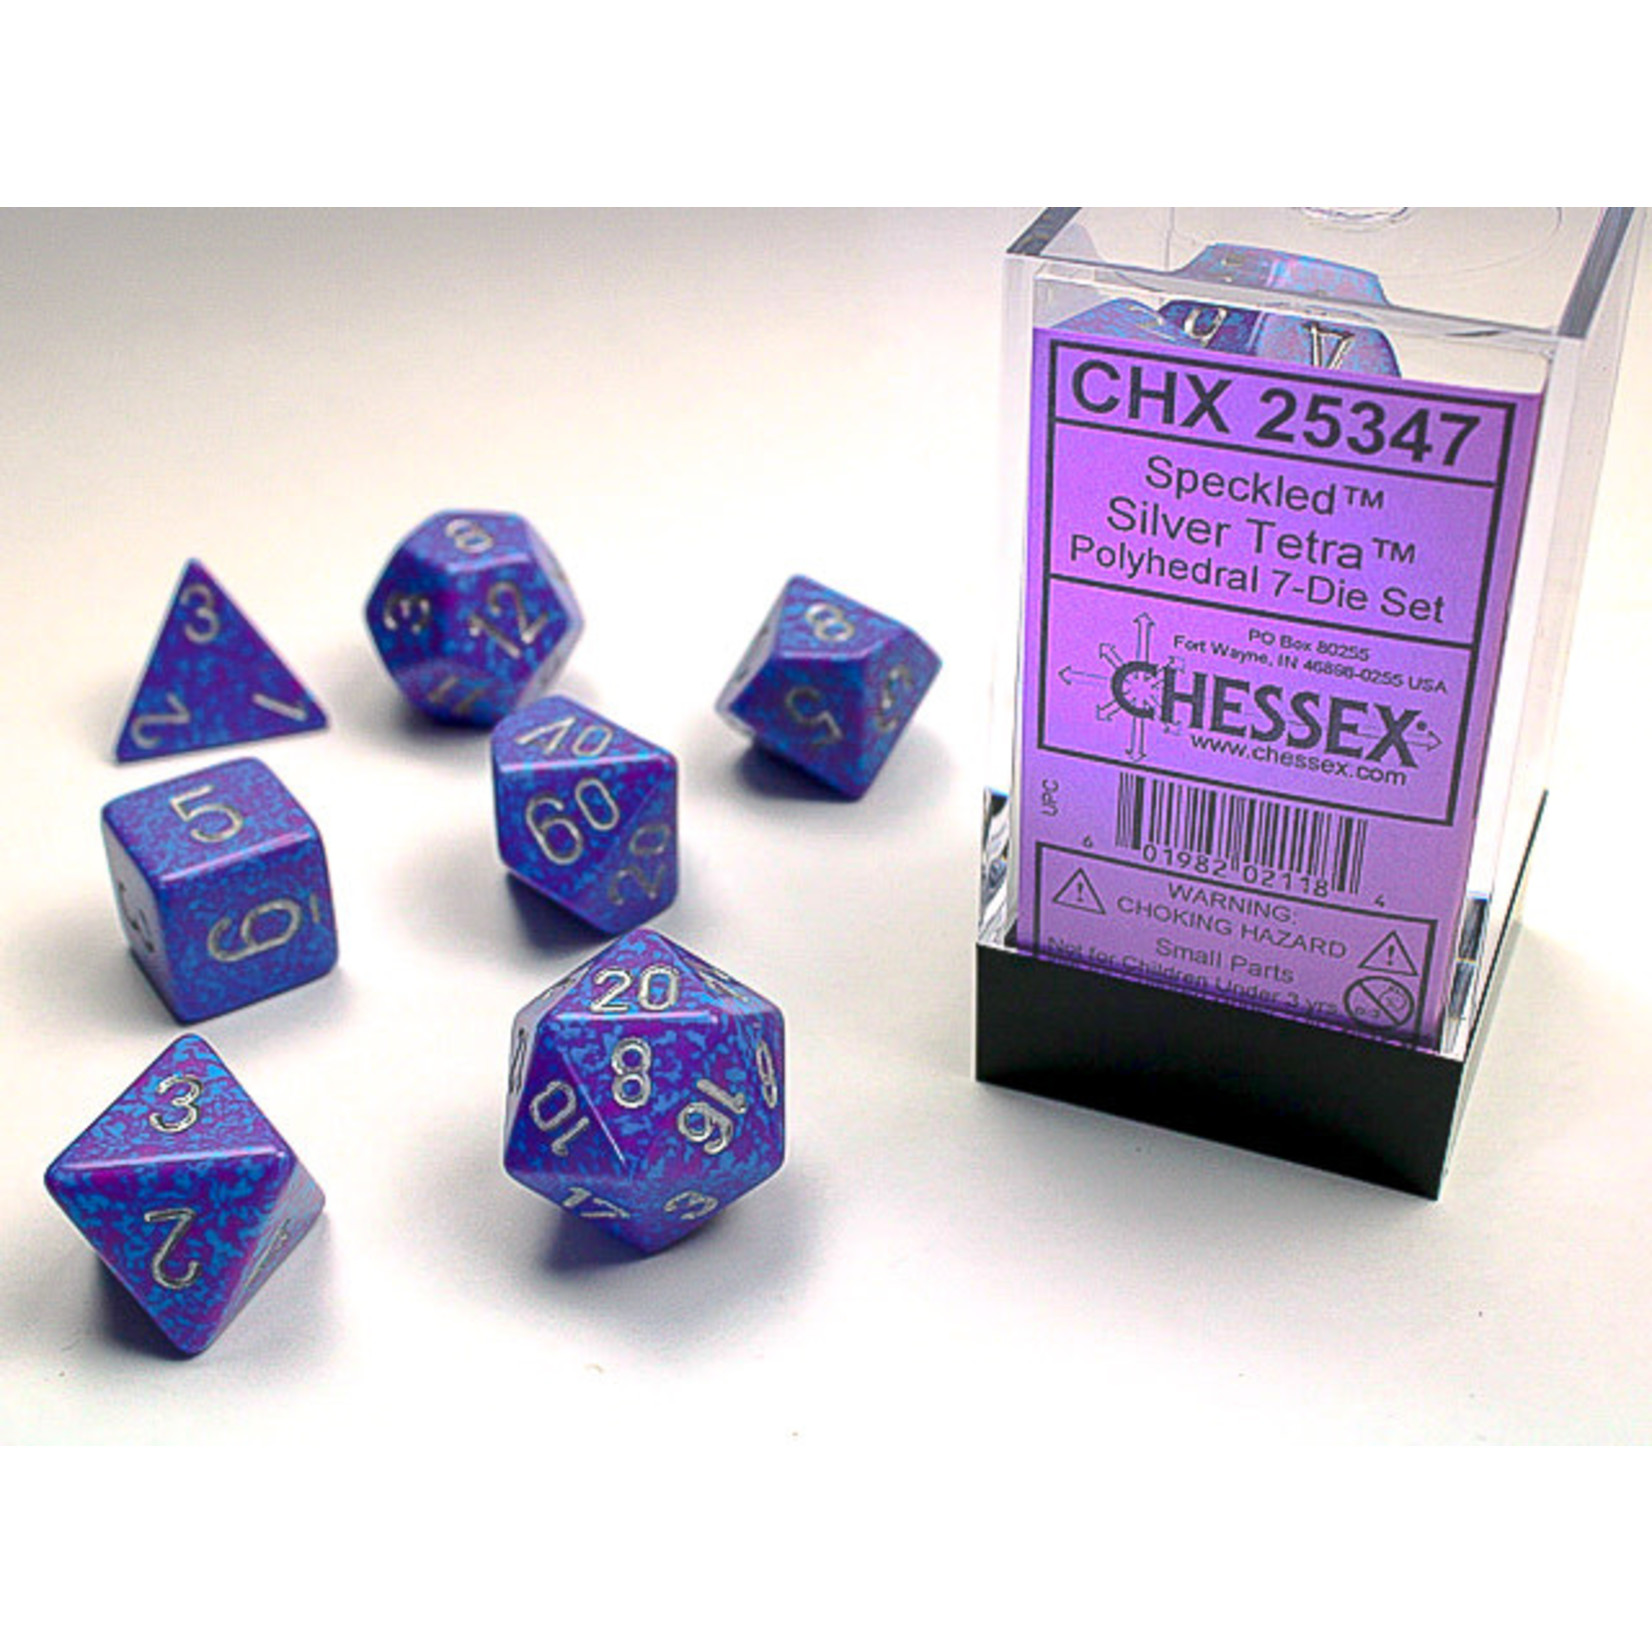 Chessex 25347 Speckled 7pc Silver Tetra RPG Dice